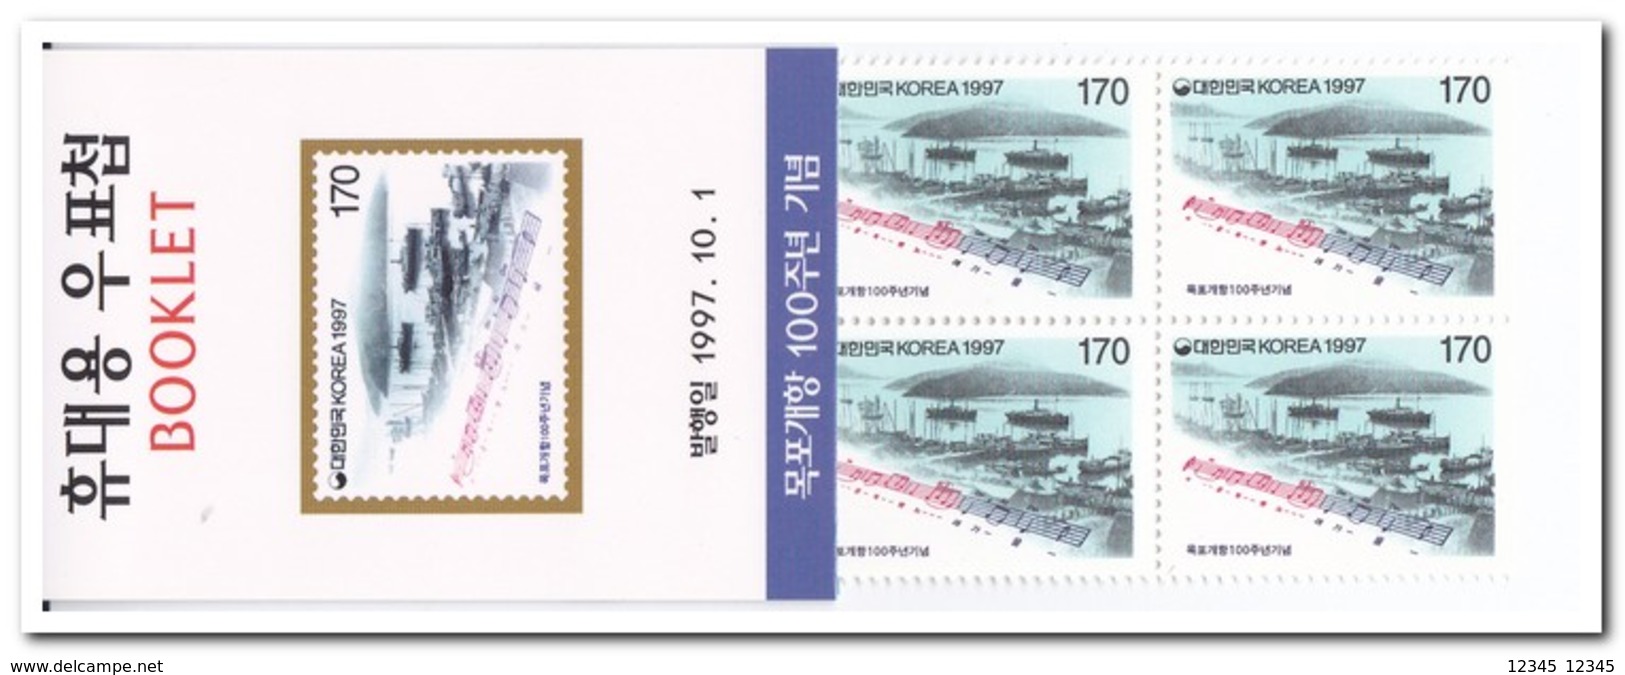 Zuid Korea 1997, Postfris MNH, 100 Anniversary Of The Opening Of The Port For Foreign Trade, Booklet - Korea, South